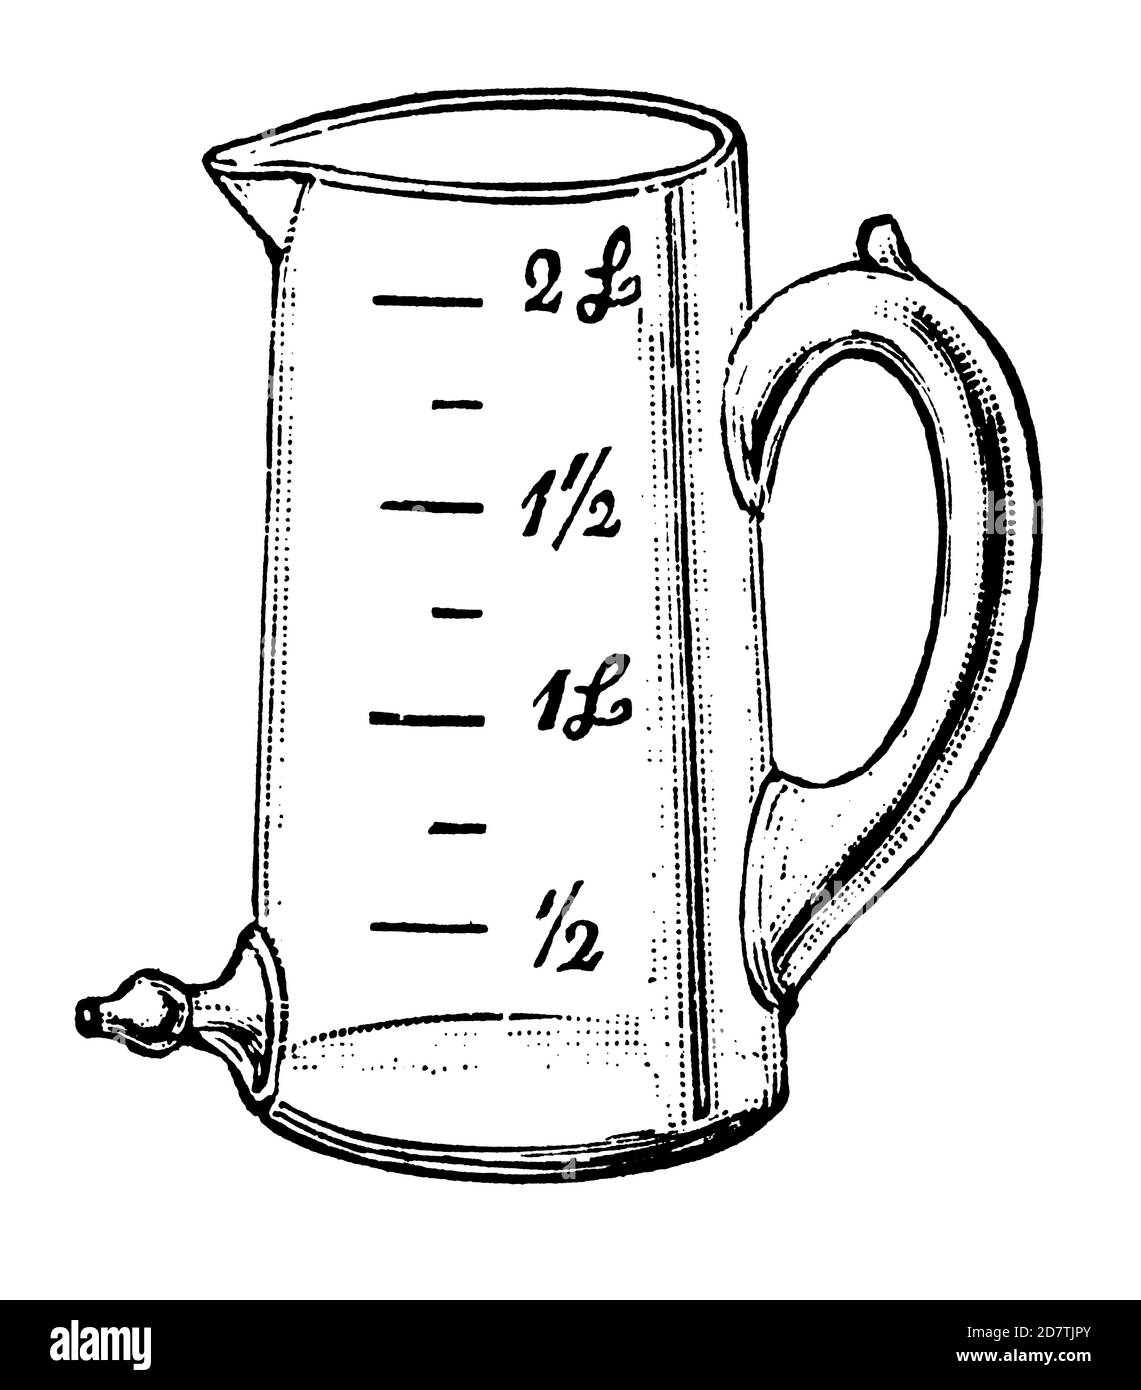 19th-century engraving of a measuring beaker mug (isolated on white). Published in Specimens des divers caracteres et vignettes typographiques de la f Stock Photo